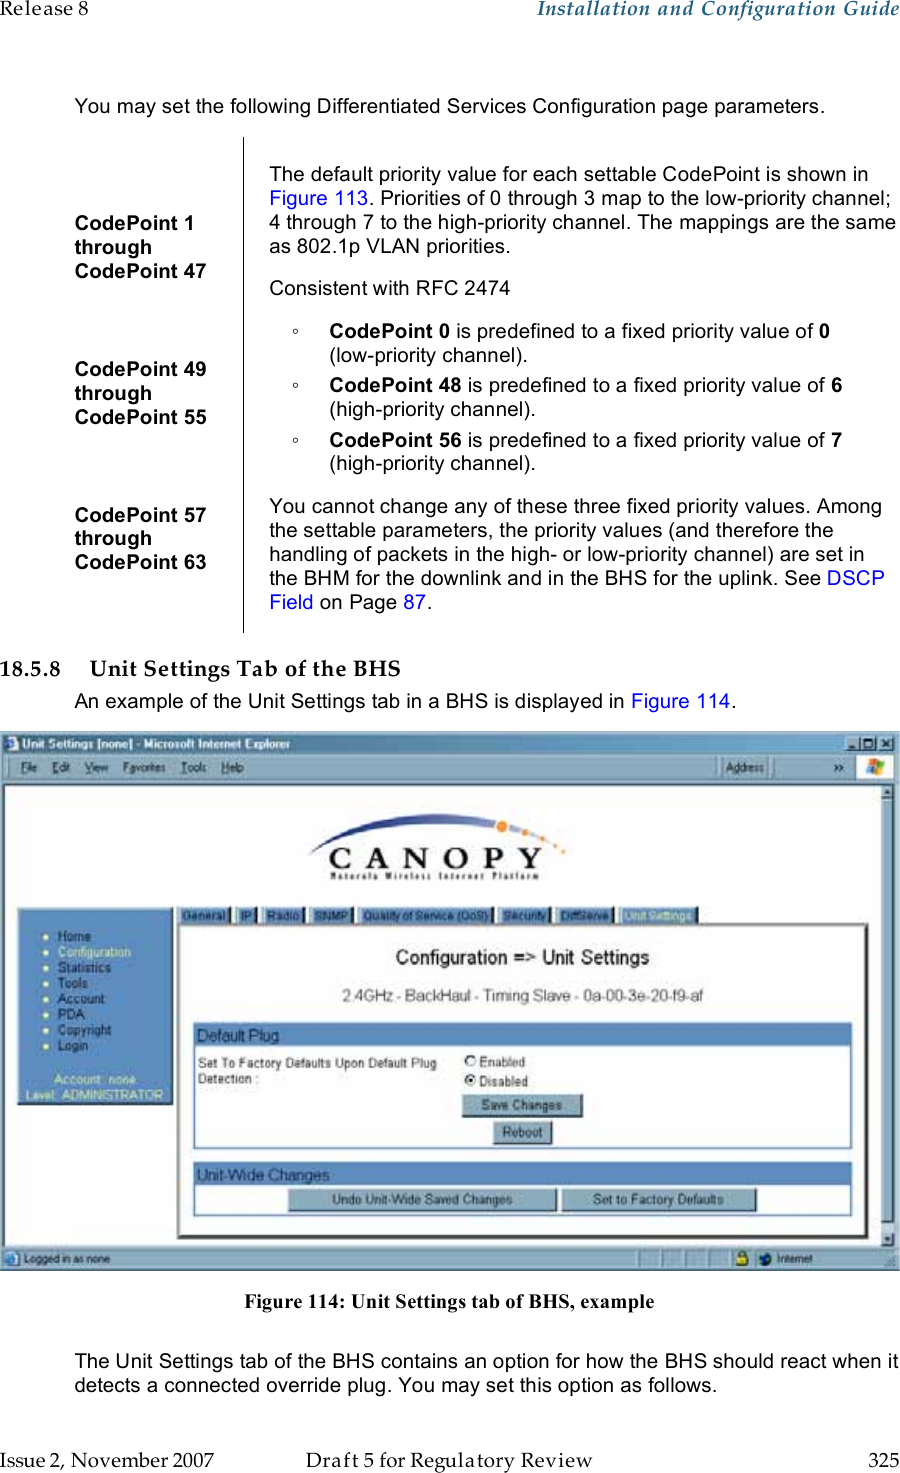 Release 8    Installation and Configuration Guide   Issue 2, November 2007  Draft 5 for Regulatory Review  325      You may set the following Differentiated Services Configuration page parameters.  CodePoint 1  through  CodePoint 47  CodePoint 49  through  CodePoint 55  CodePoint 57  through  CodePoint 63  The default priority value for each settable CodePoint is shown in Figure 113. Priorities of 0 through 3 map to the low-priority channel; 4 through 7 to the high-priority channel. The mappings are the same as 802.1p VLAN priorities. Consistent with RFC 2474 ◦ CodePoint 0 is predefined to a fixed priority value of 0  (low-priority channel). ◦ CodePoint 48 is predefined to a fixed priority value of 6 (high-priority channel). ◦ CodePoint 56 is predefined to a fixed priority value of 7 (high-priority channel). You cannot change any of these three fixed priority values. Among the settable parameters, the priority values (and therefore the handling of packets in the high- or low-priority channel) are set in the BHM for the downlink and in the BHS for the uplink. See DSCP Field on Page 87. 18.5.8 Unit Settings Tab of the BHS An example of the Unit Settings tab in a BHS is displayed in Figure 114.  Figure 114: Unit Settings tab of BHS, example  The Unit Settings tab of the BHS contains an option for how the BHS should react when it detects a connected override plug. You may set this option as follows. 